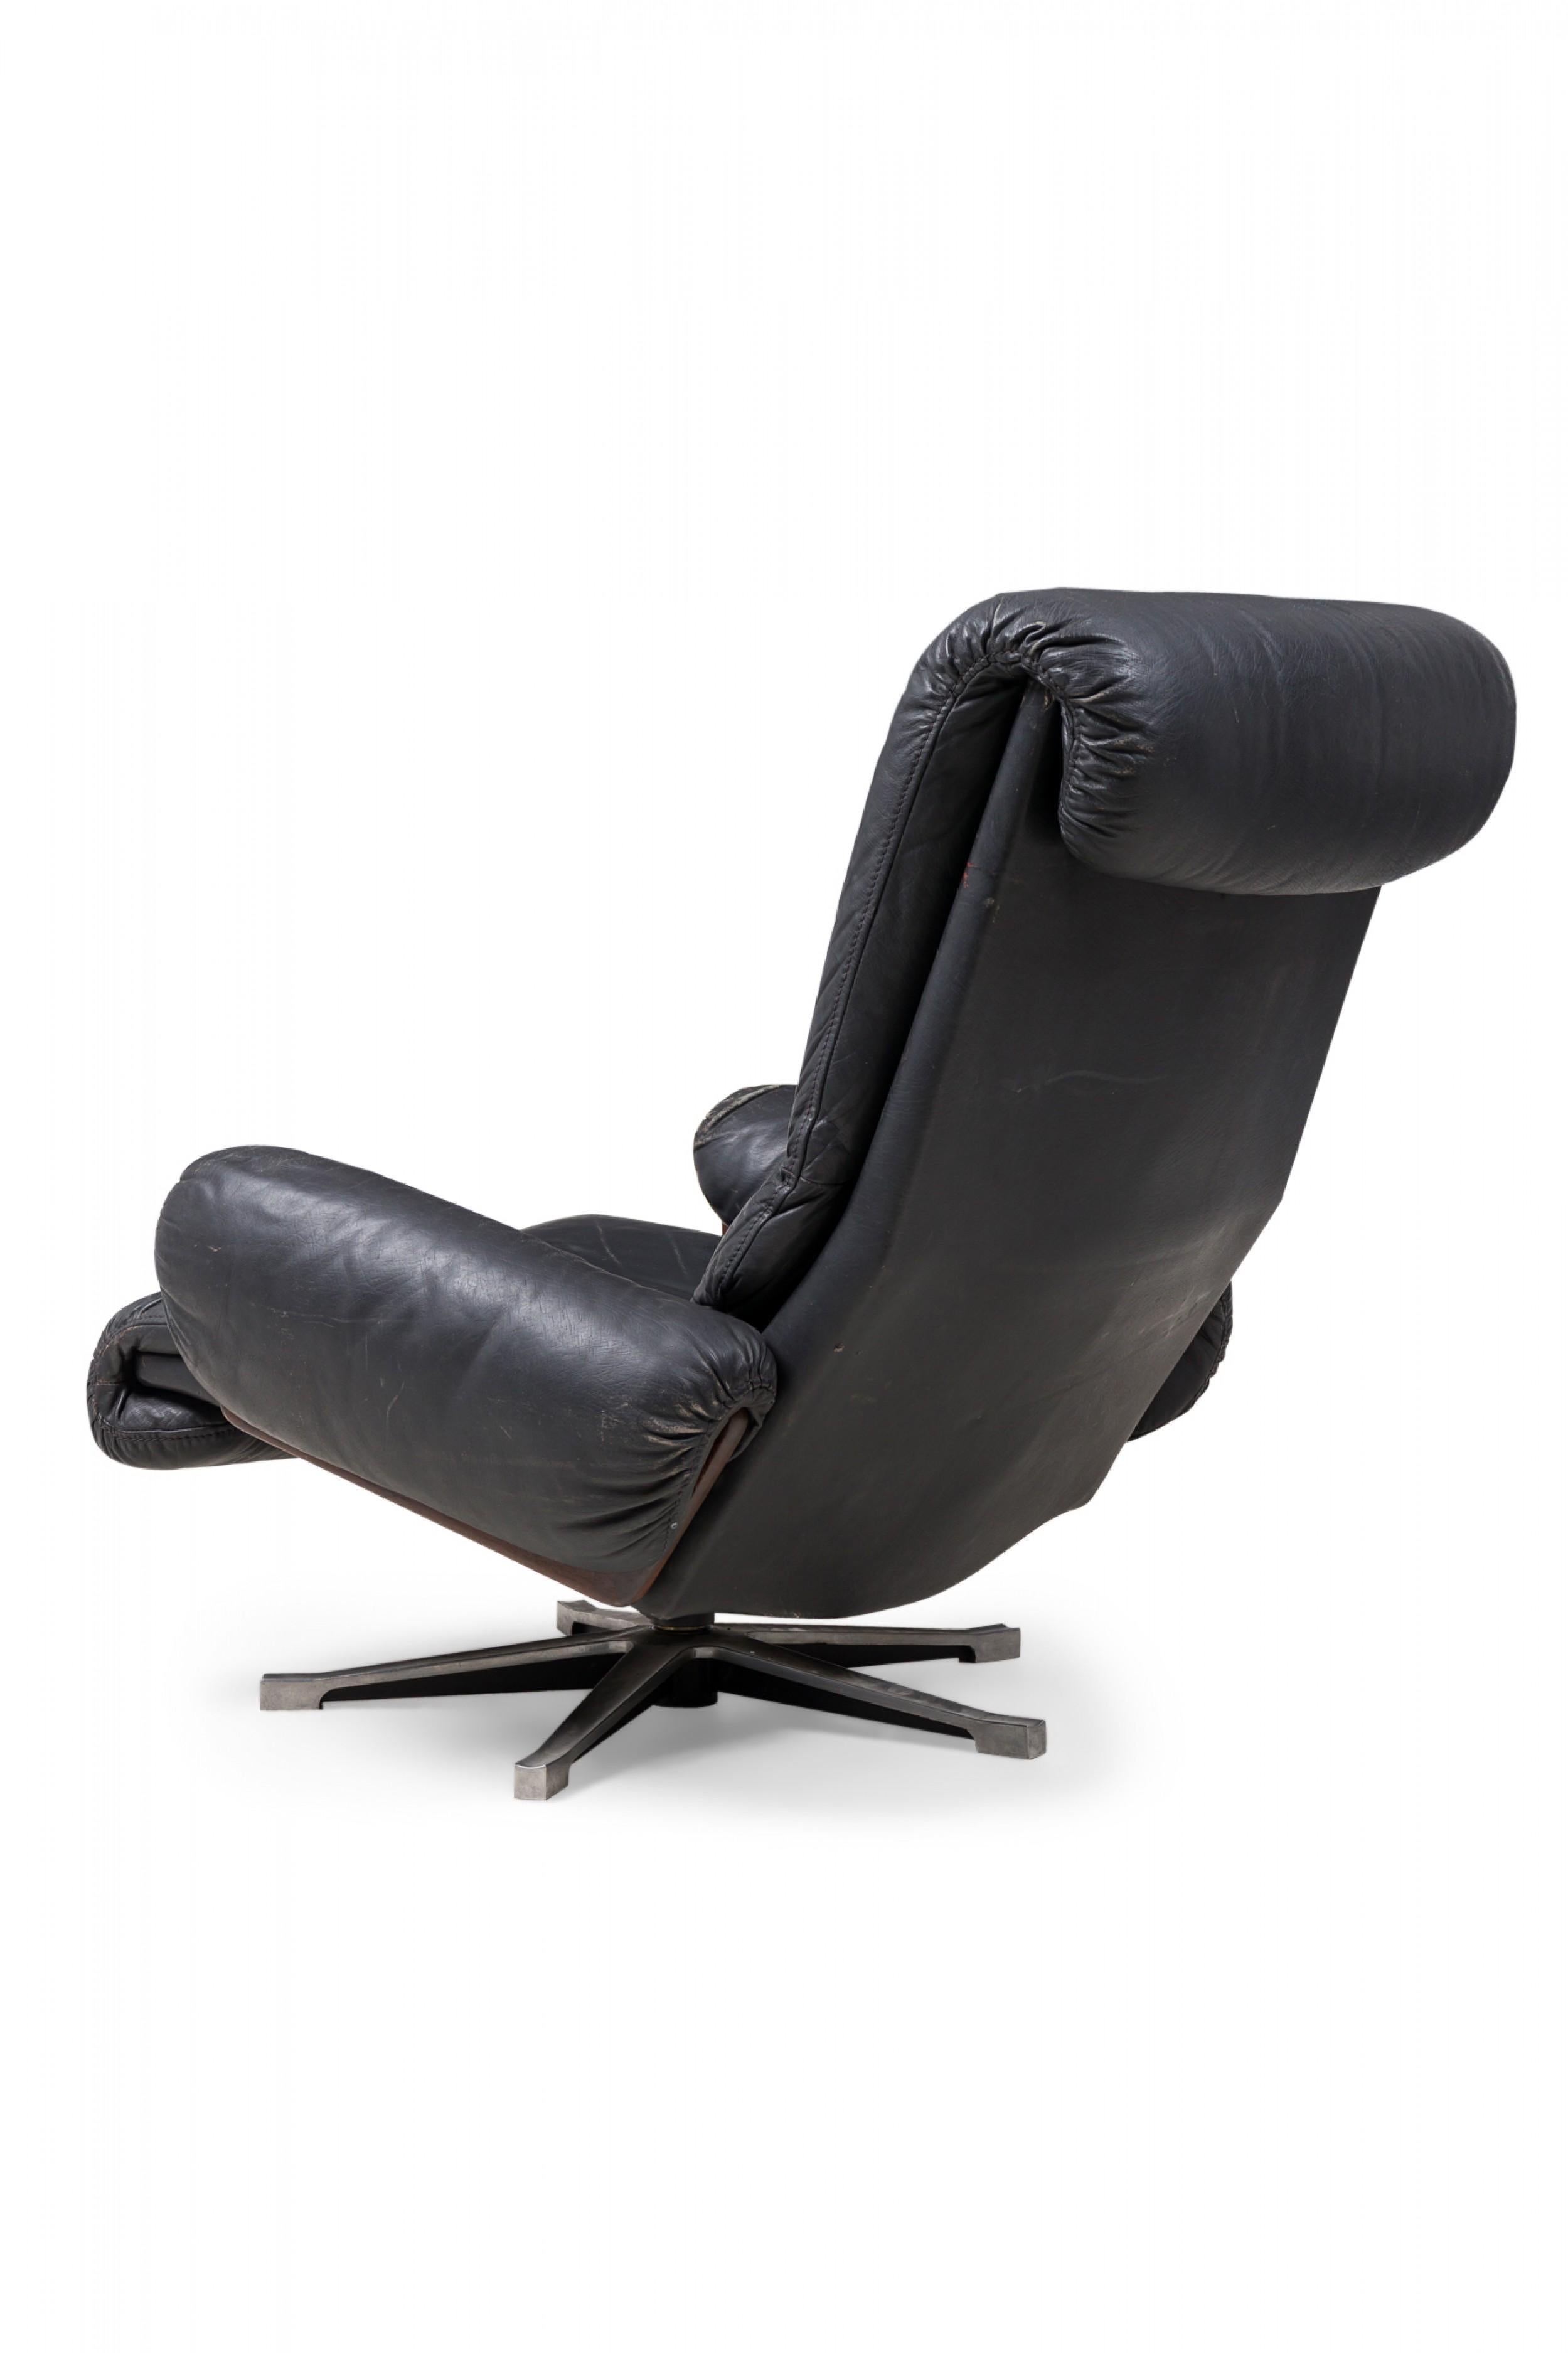 20th Century Desede Midcentury Swiss Metal & Black Leather Upholstered Swivel Chair For Sale